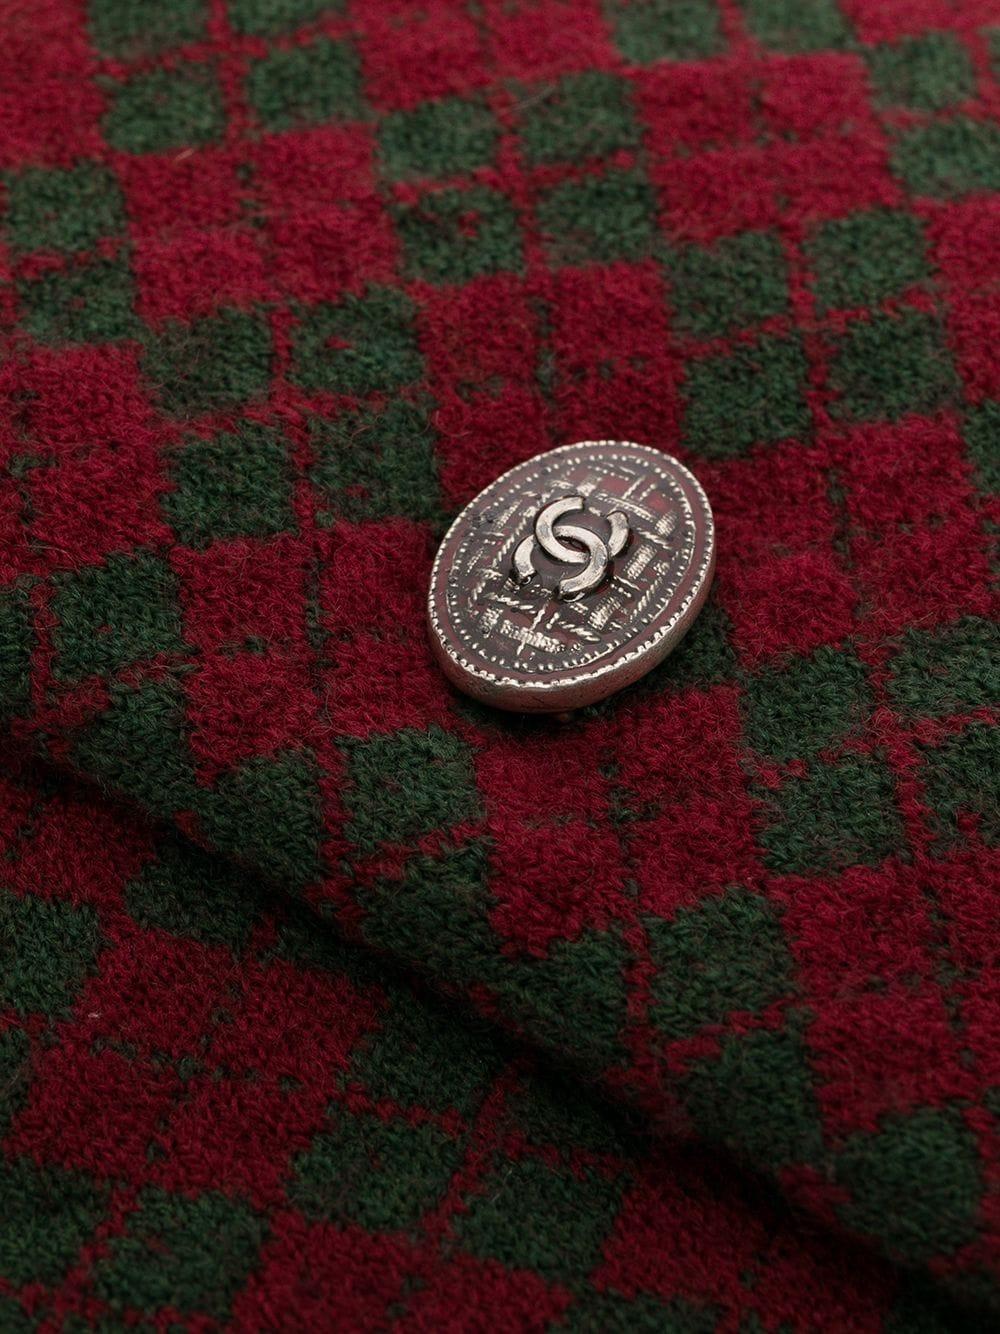 These Chanel long mittens are crafted from 100% wool in a charming and on-trend red/green tartan pattern. Just perfect for the colder months.

Colour: Red & Green Tartan

Composition: 100% Wool

Condition: Excellent condition, no marks or